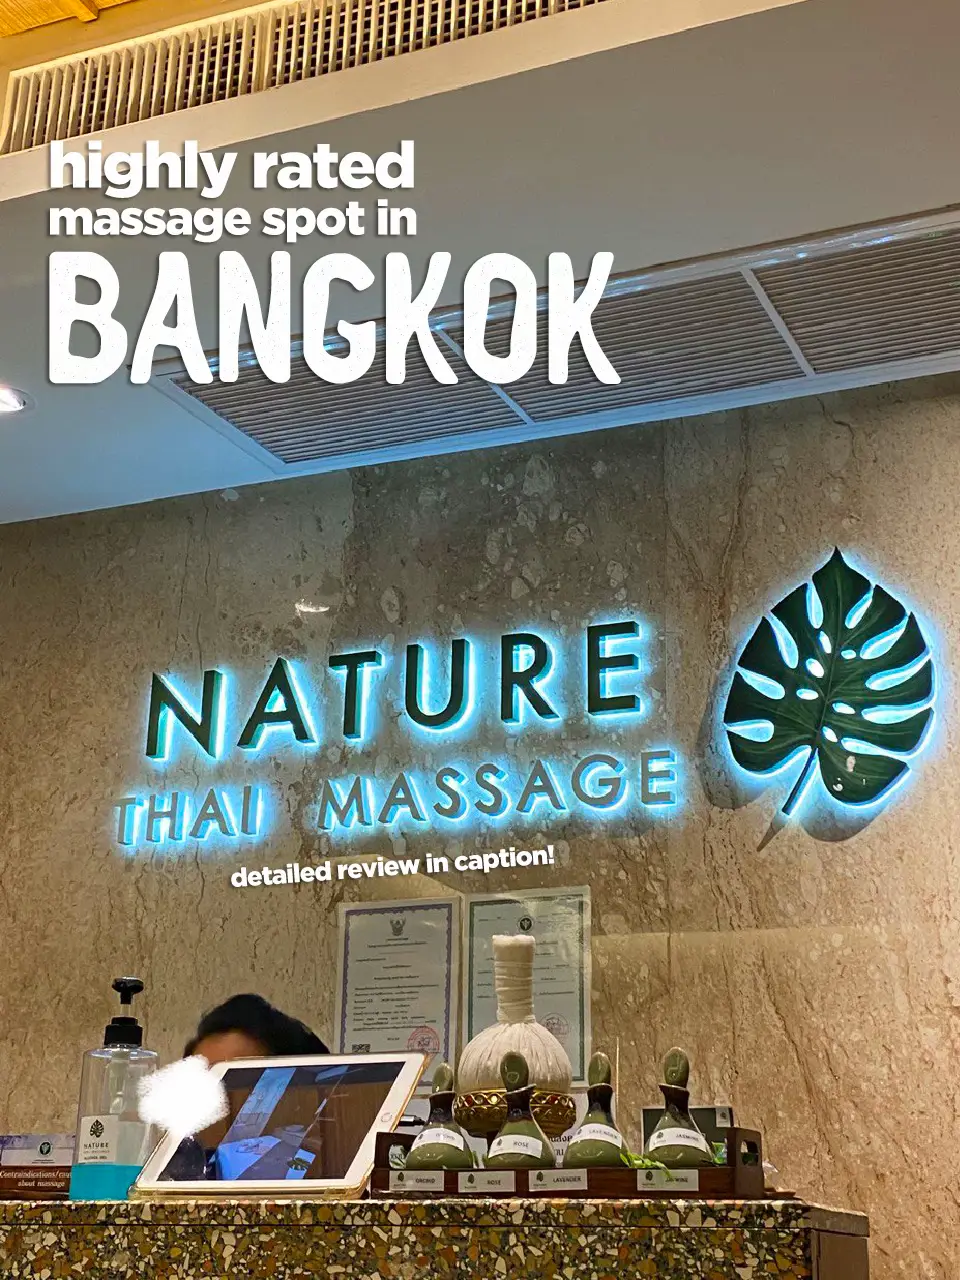 reviewing a highly rated massage spot in Bangkok 👀's images(0)